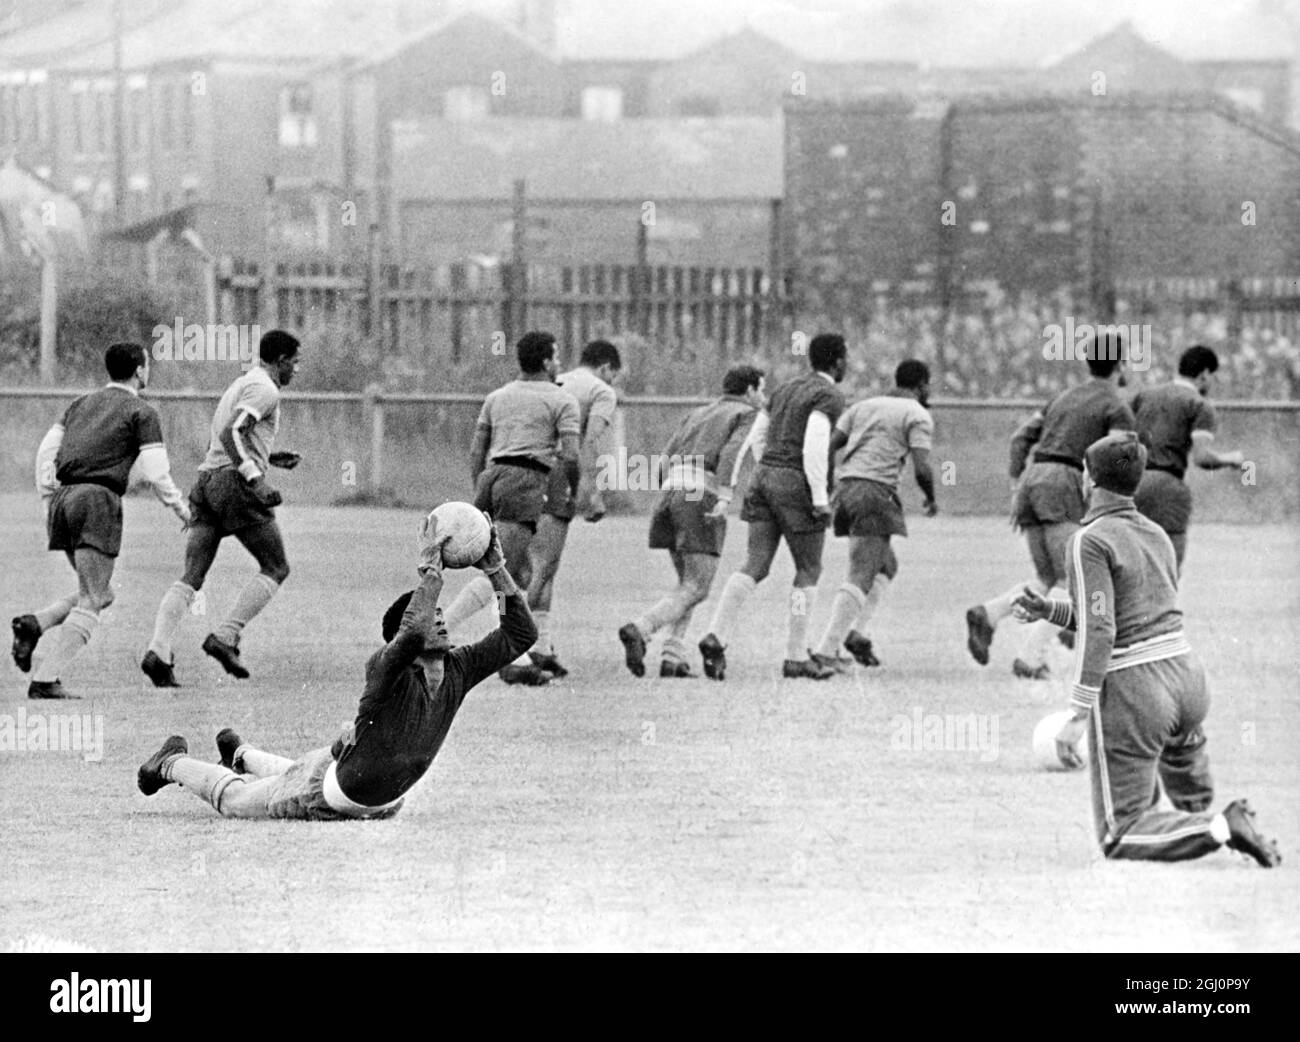 Brazilians training at Bolton . Bolton , Lancs , England : Paulo Amaral , trainer of the Brazilian footballers , seen throwing the ball to Manga , one of the two goal - keepers , as other players train in the background . Brazil meet Hungary at Goodison Park , Liverpool tonight . 15 July 1966 Stock Photo